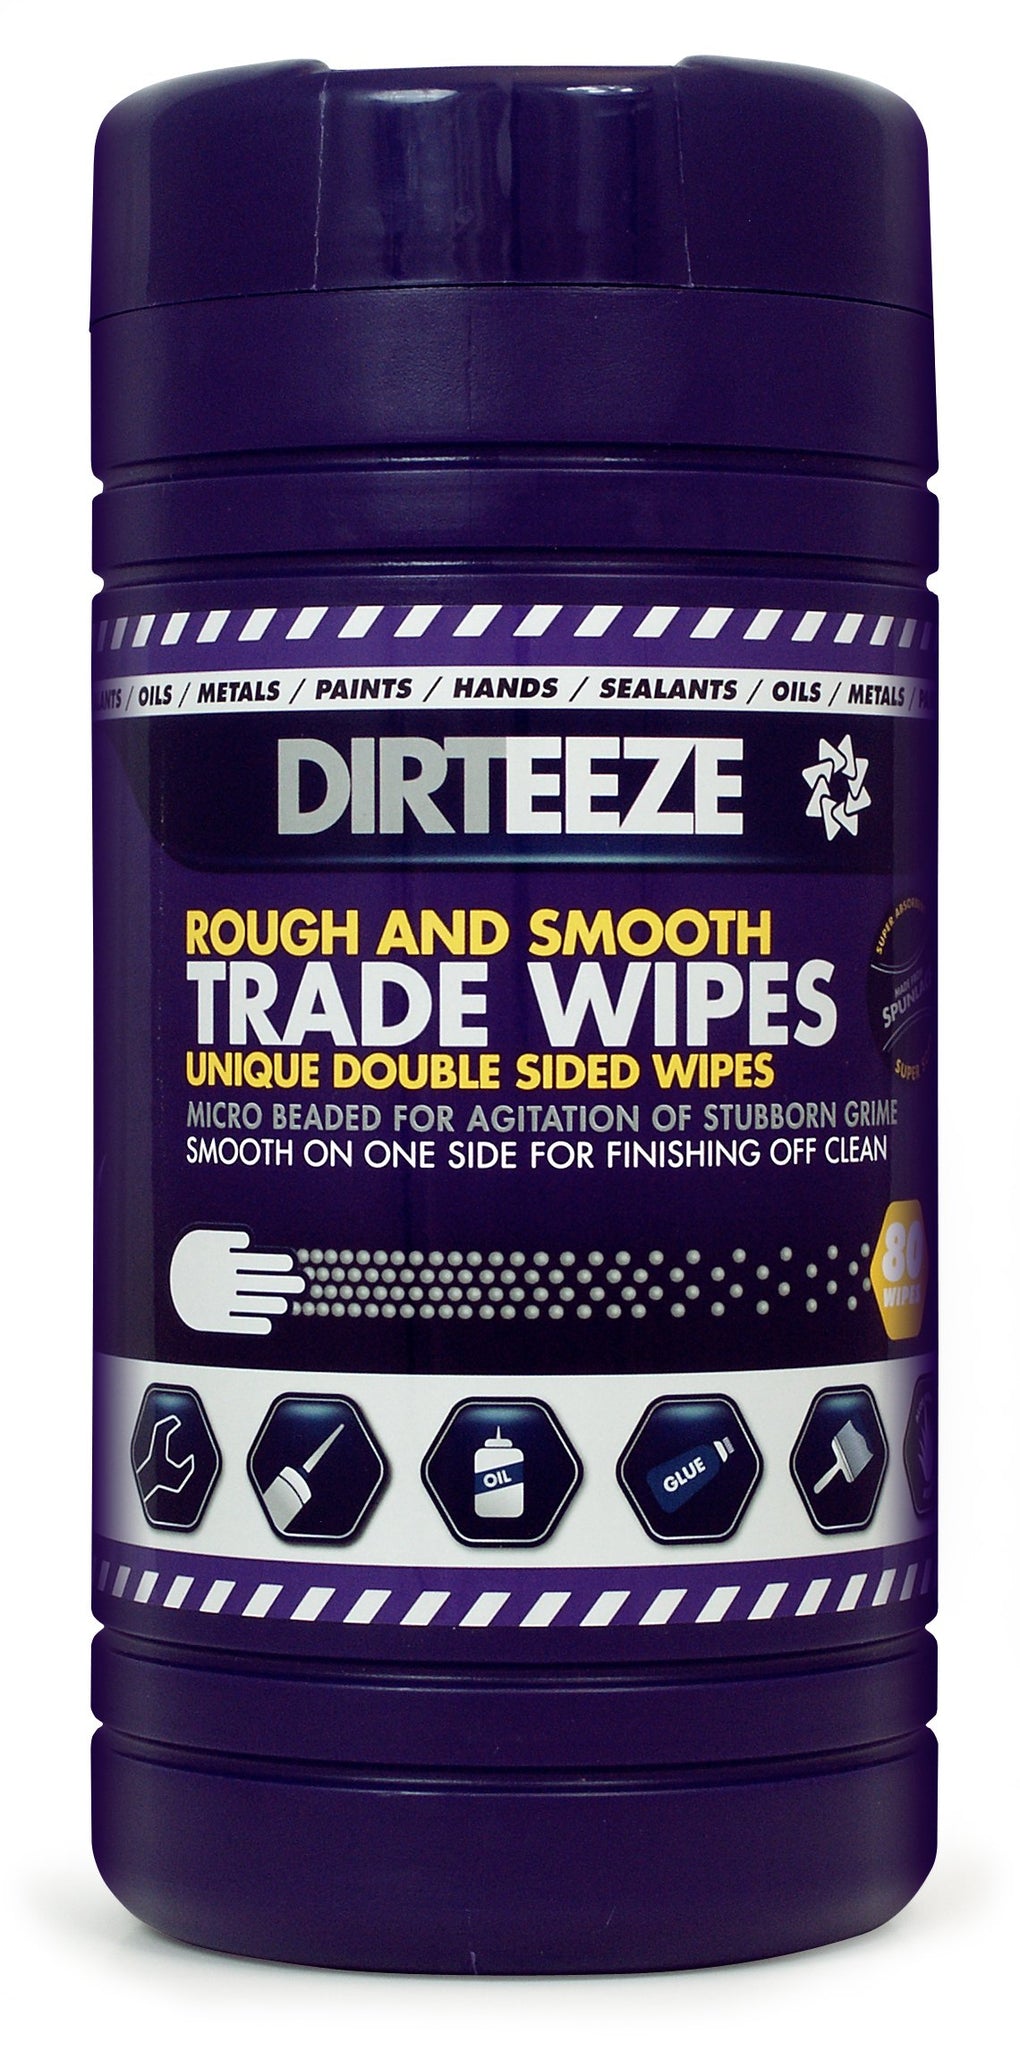 Dirteeze Rough & Smooth Trade Wipes - DGPCL80 ||8 Tubs of 80 Wipes